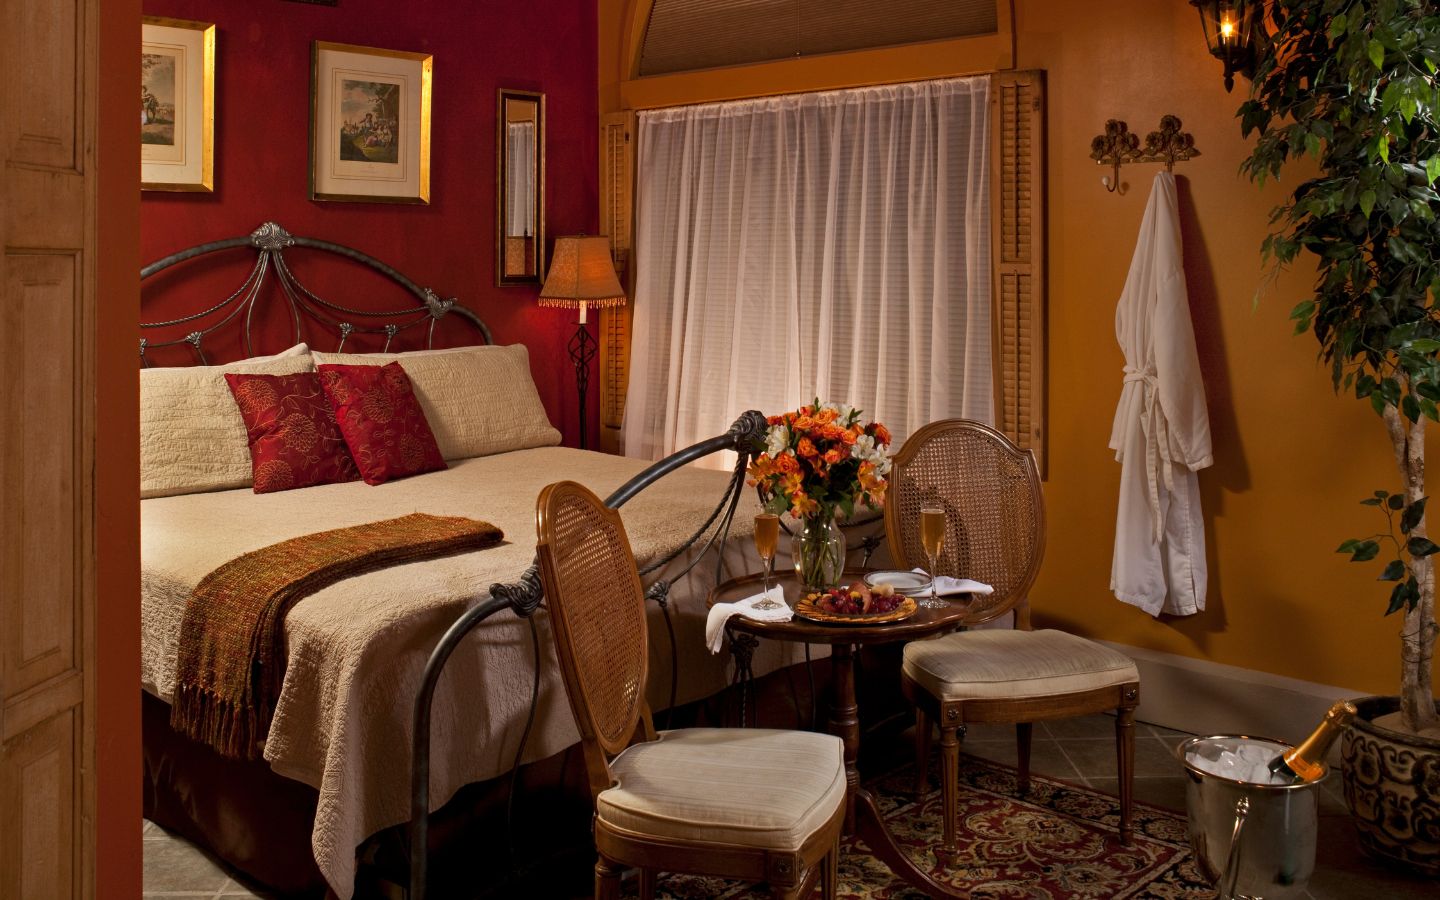 Romantic Romeo & Juliet guest rooms in warm shades of pumpkin and burgundy.